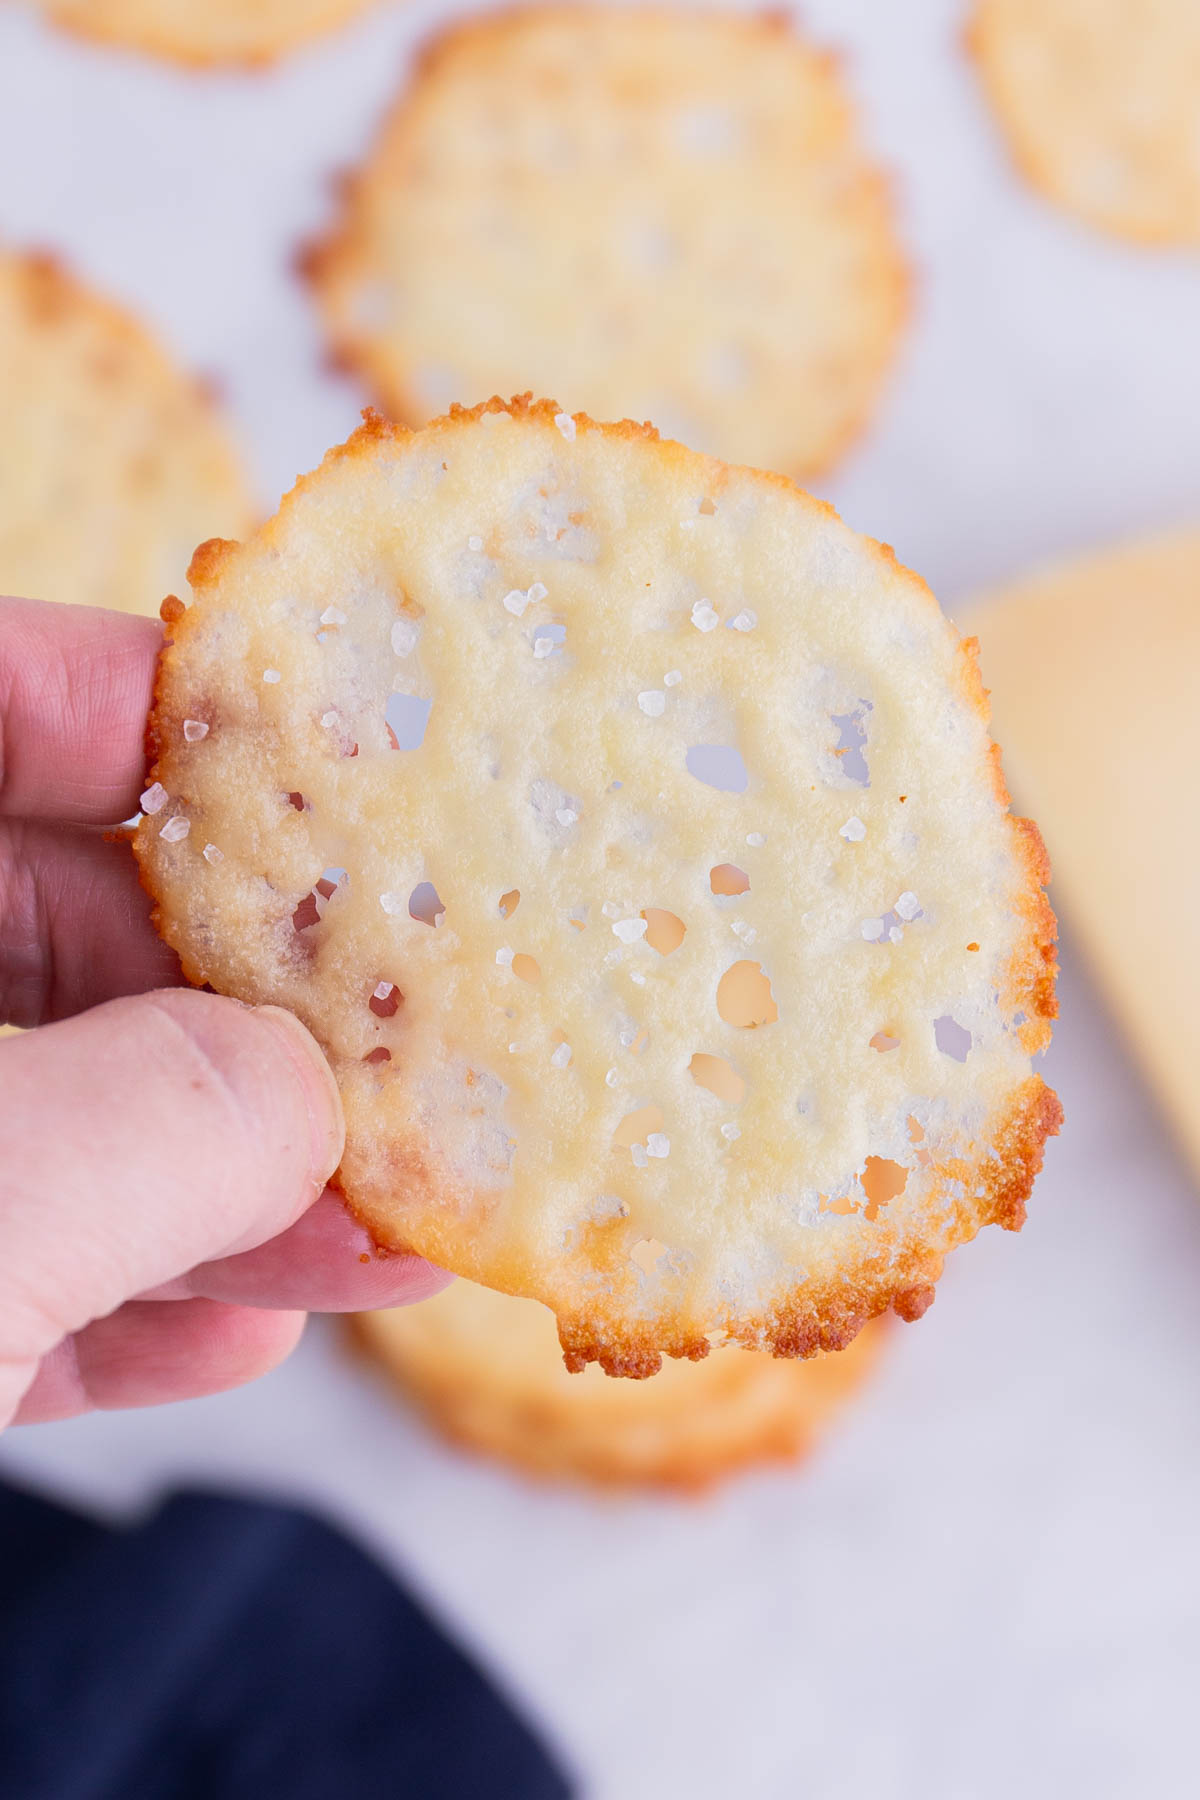 Parmesan Cheese Crisps (Oven or Skillet) RECIPE topped with salt.